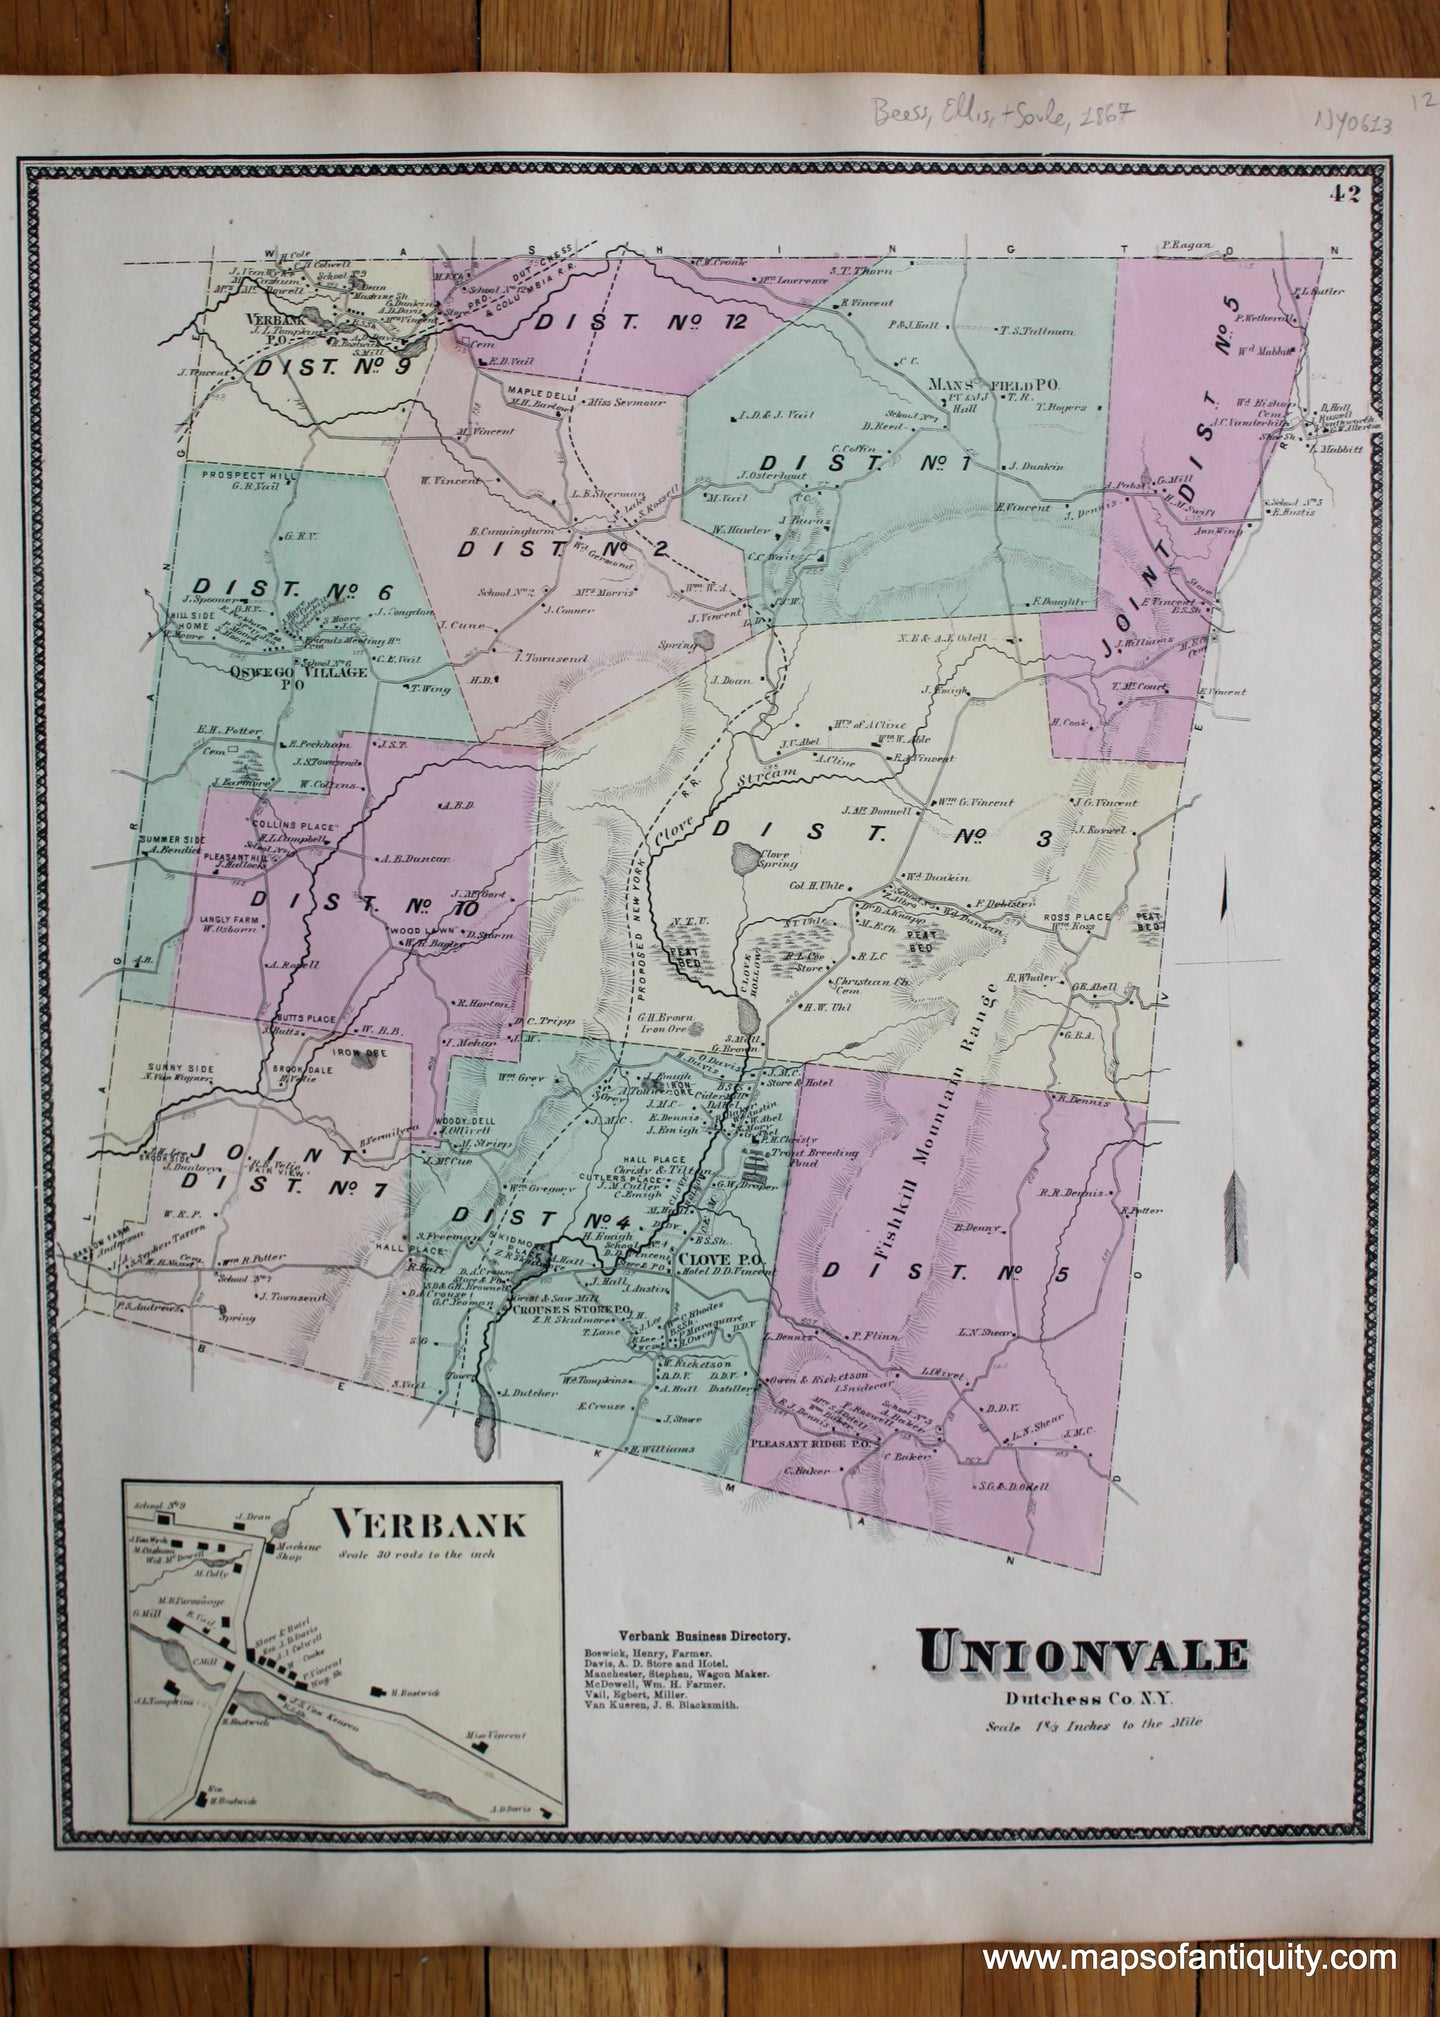 Antique-Hand-Colored-Map-Unionvale-(NY)-United-States-New-York-1867-Beers-Ellis-and-Soule-Maps-Of-Antiquity